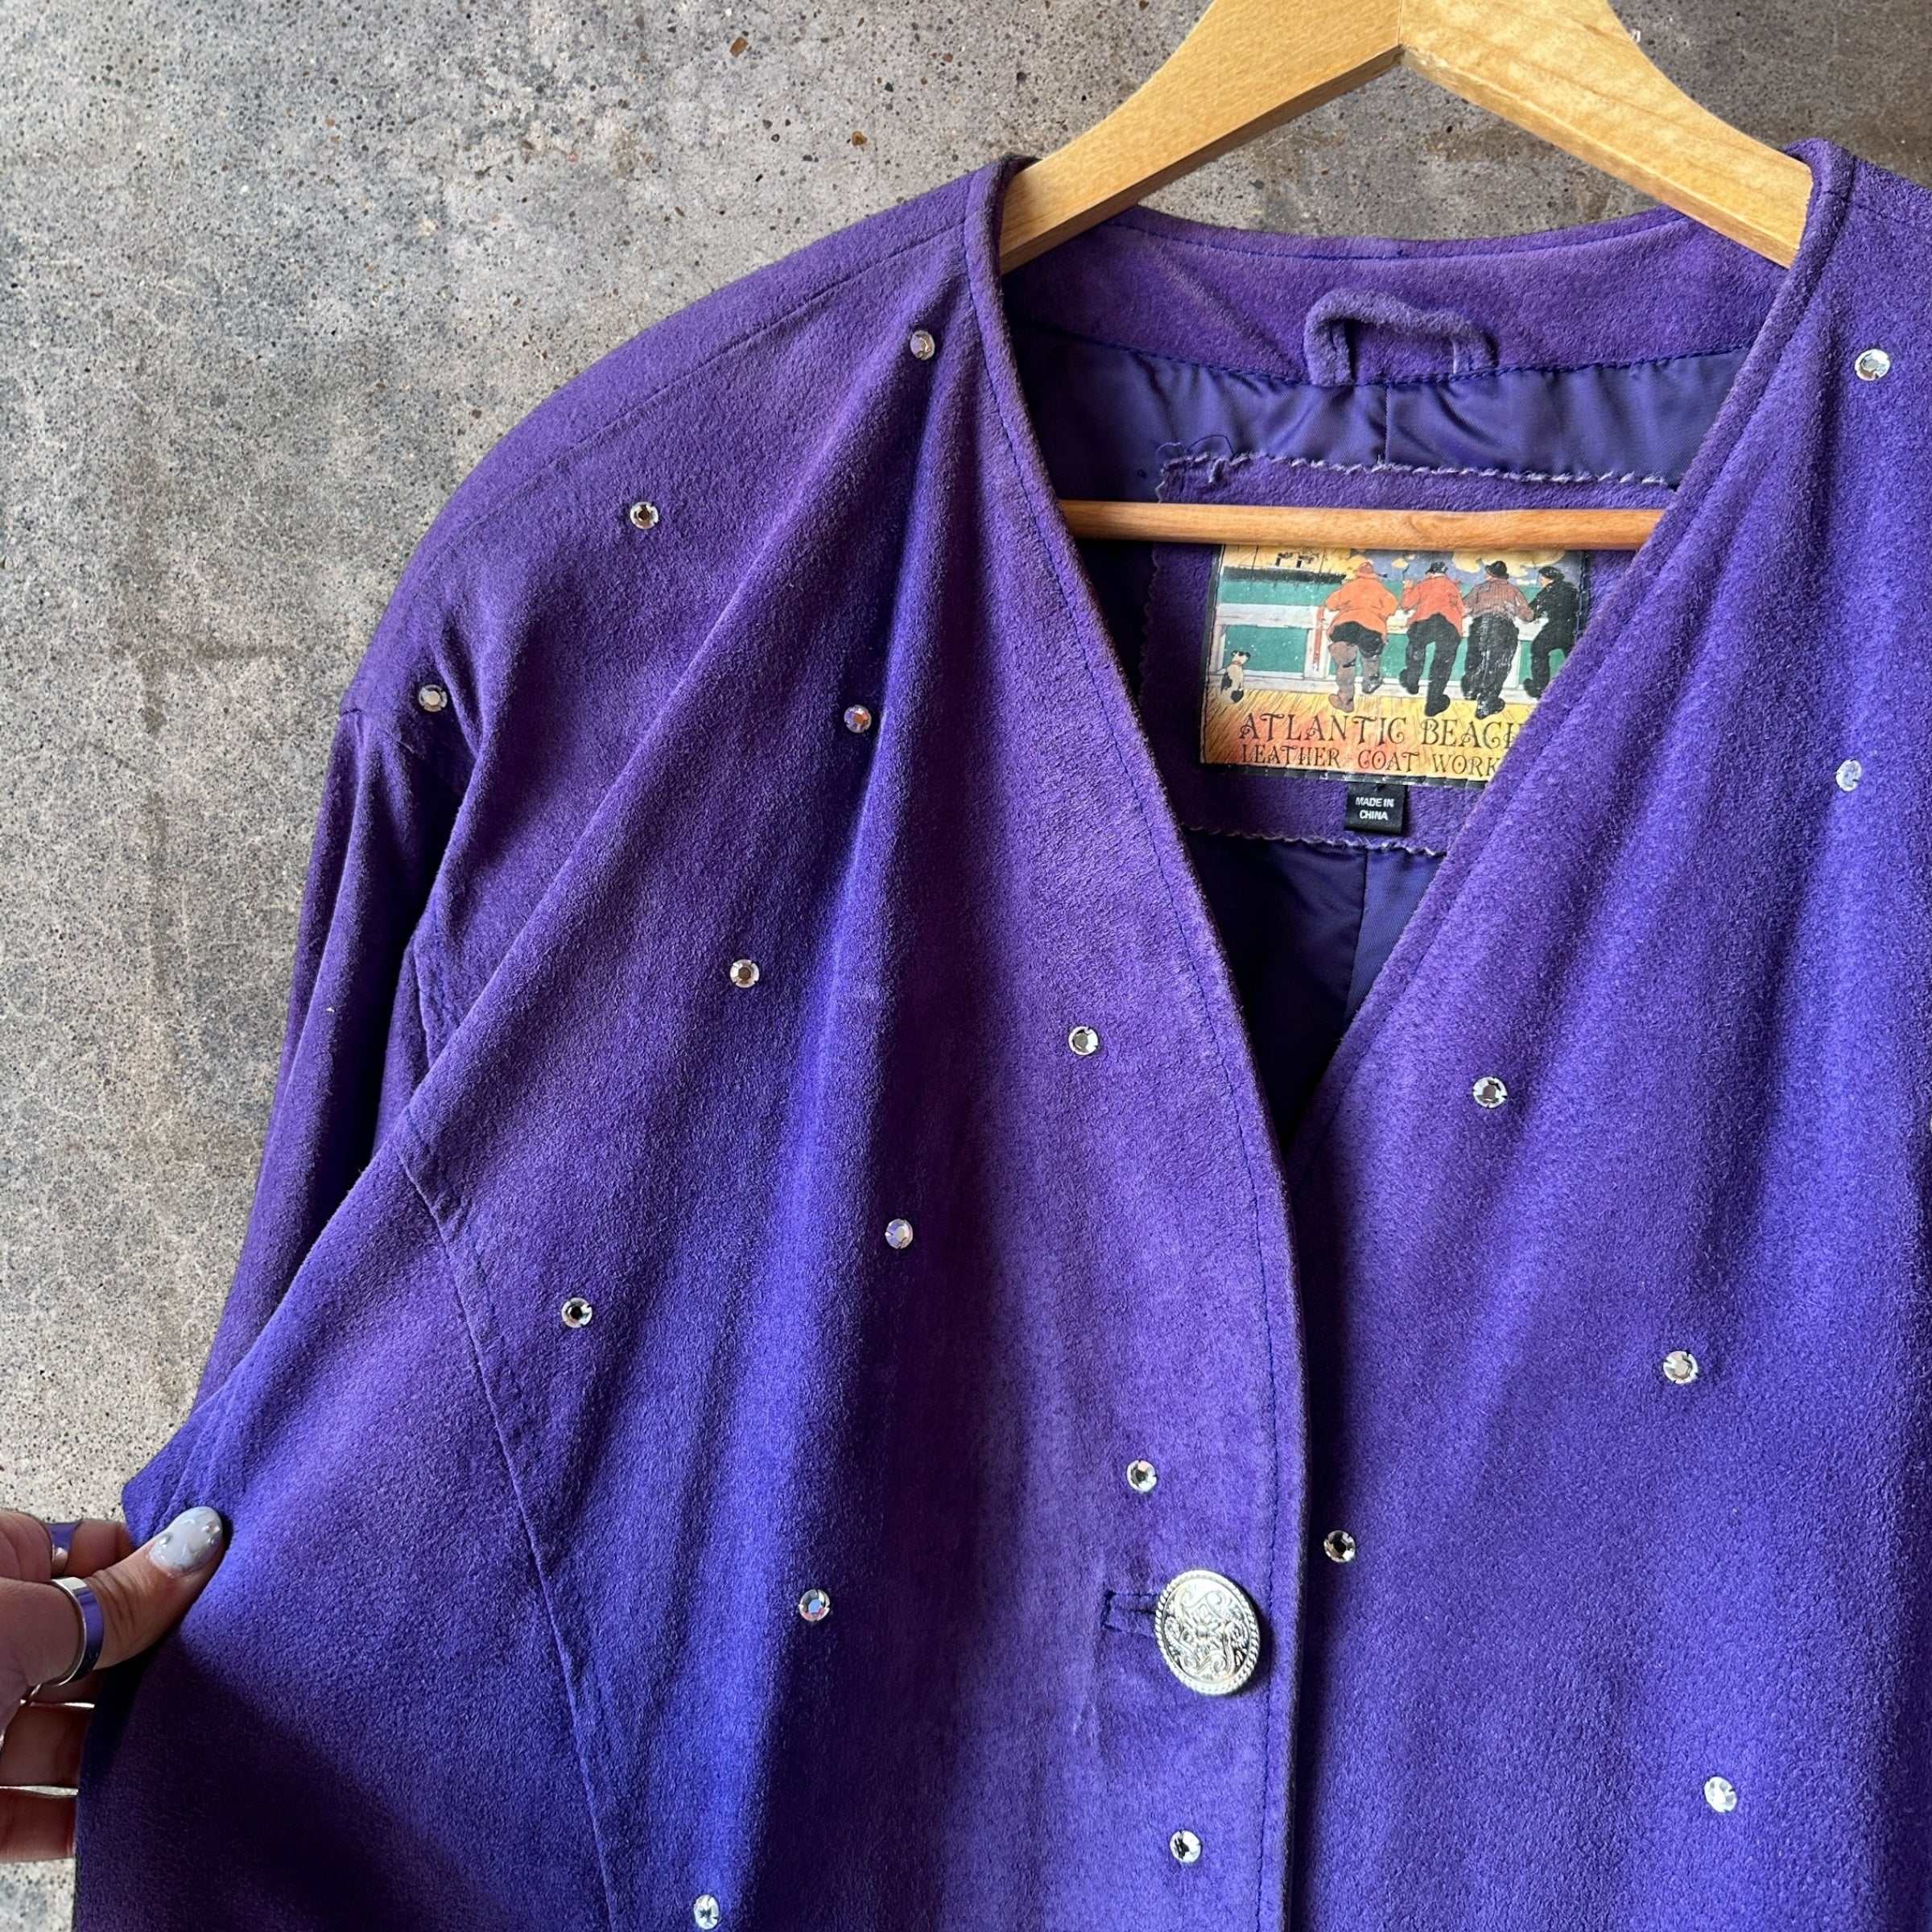 VTG purple leather coat with rhinestones and silver buttons